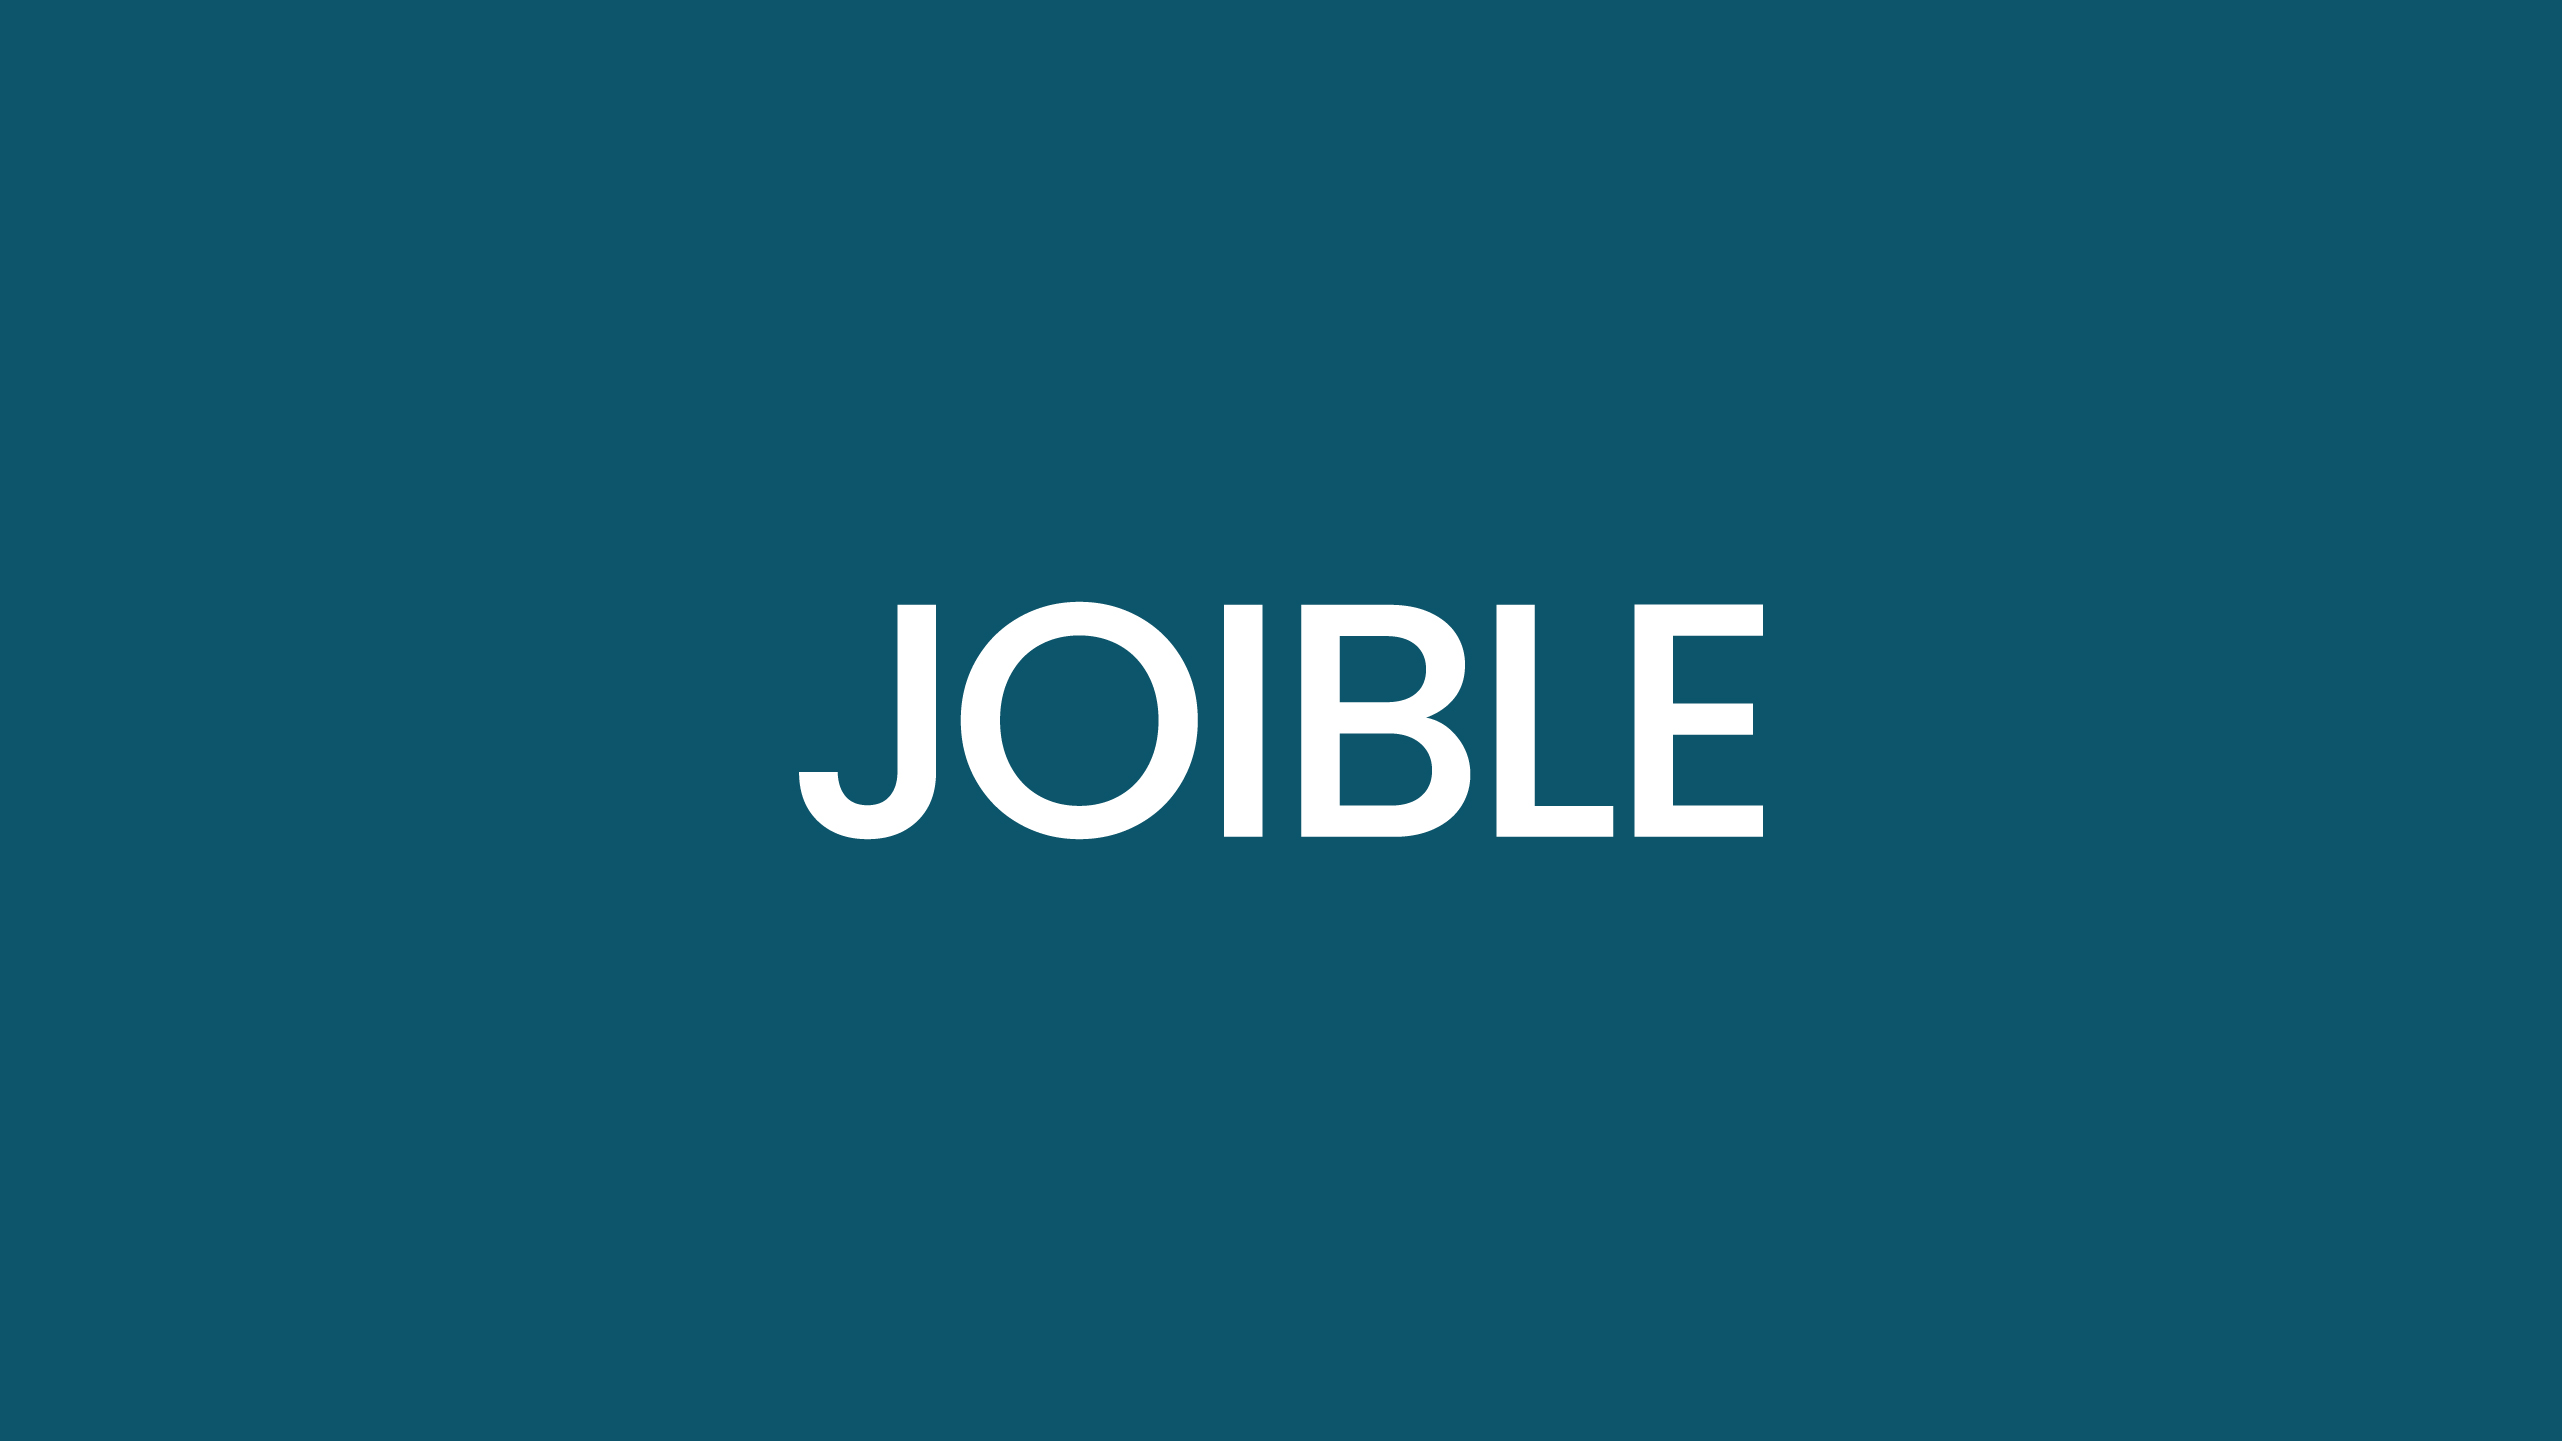 Logo of Joible, a brand for which I developed the brand identity.